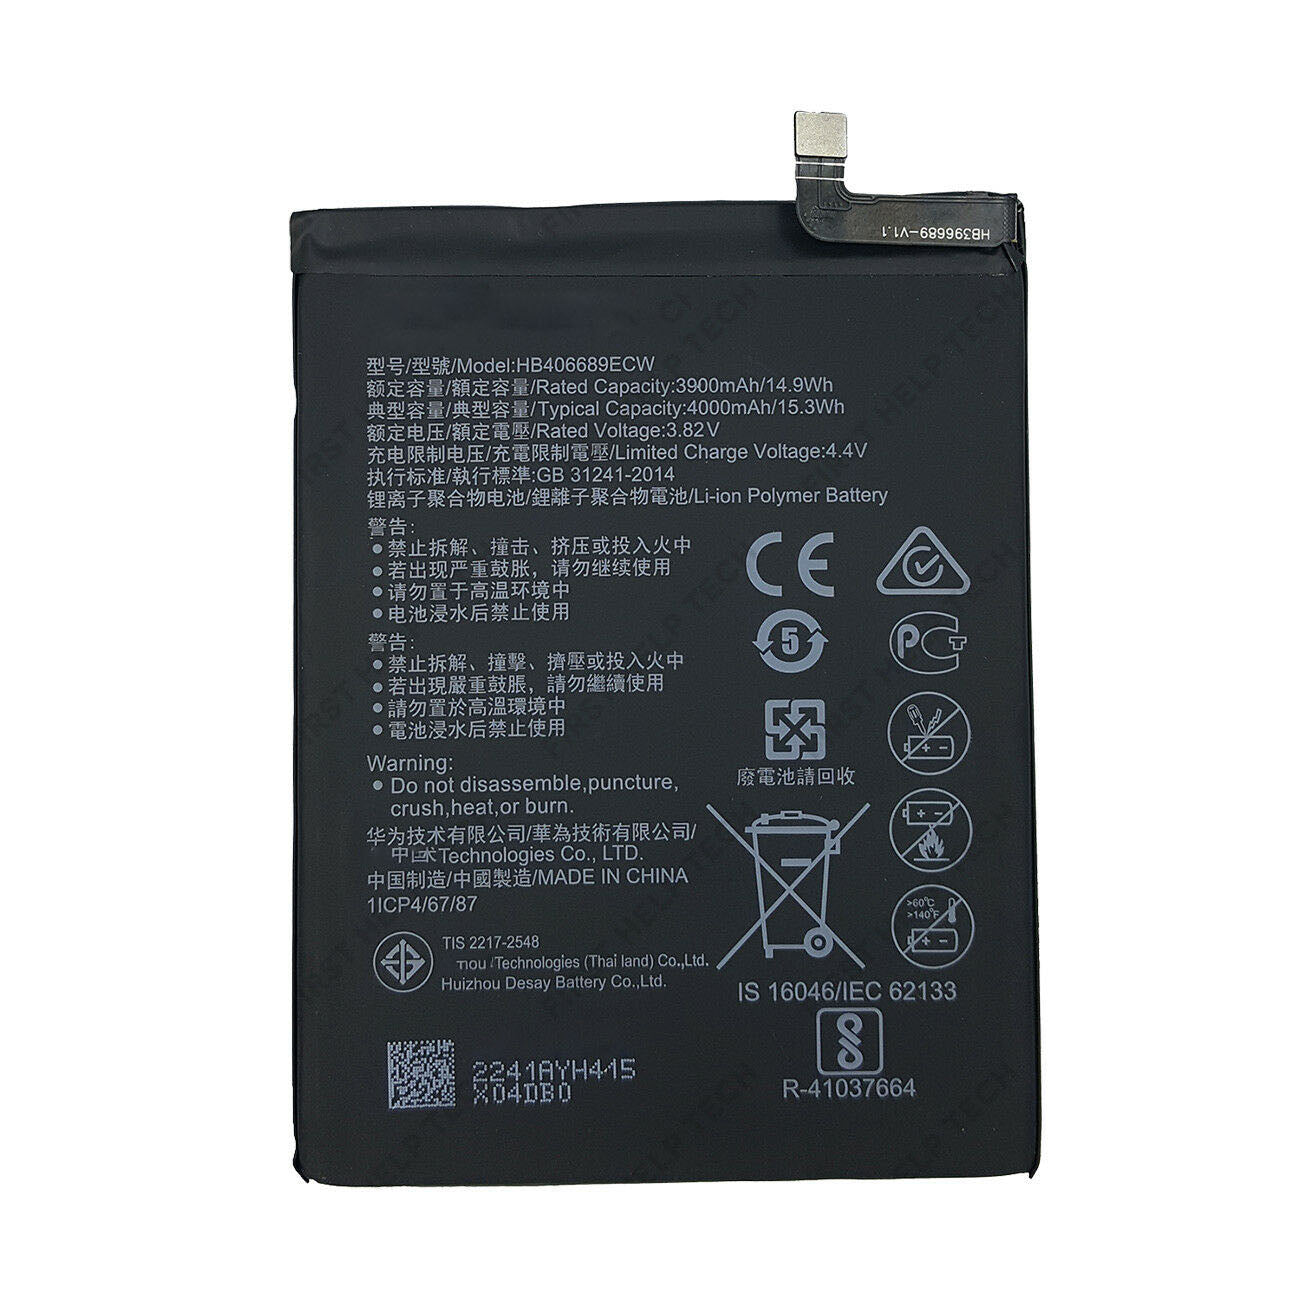 Replacement Battery For Huawei Mate 9 / Mate 9 Pro - HB396689ECW